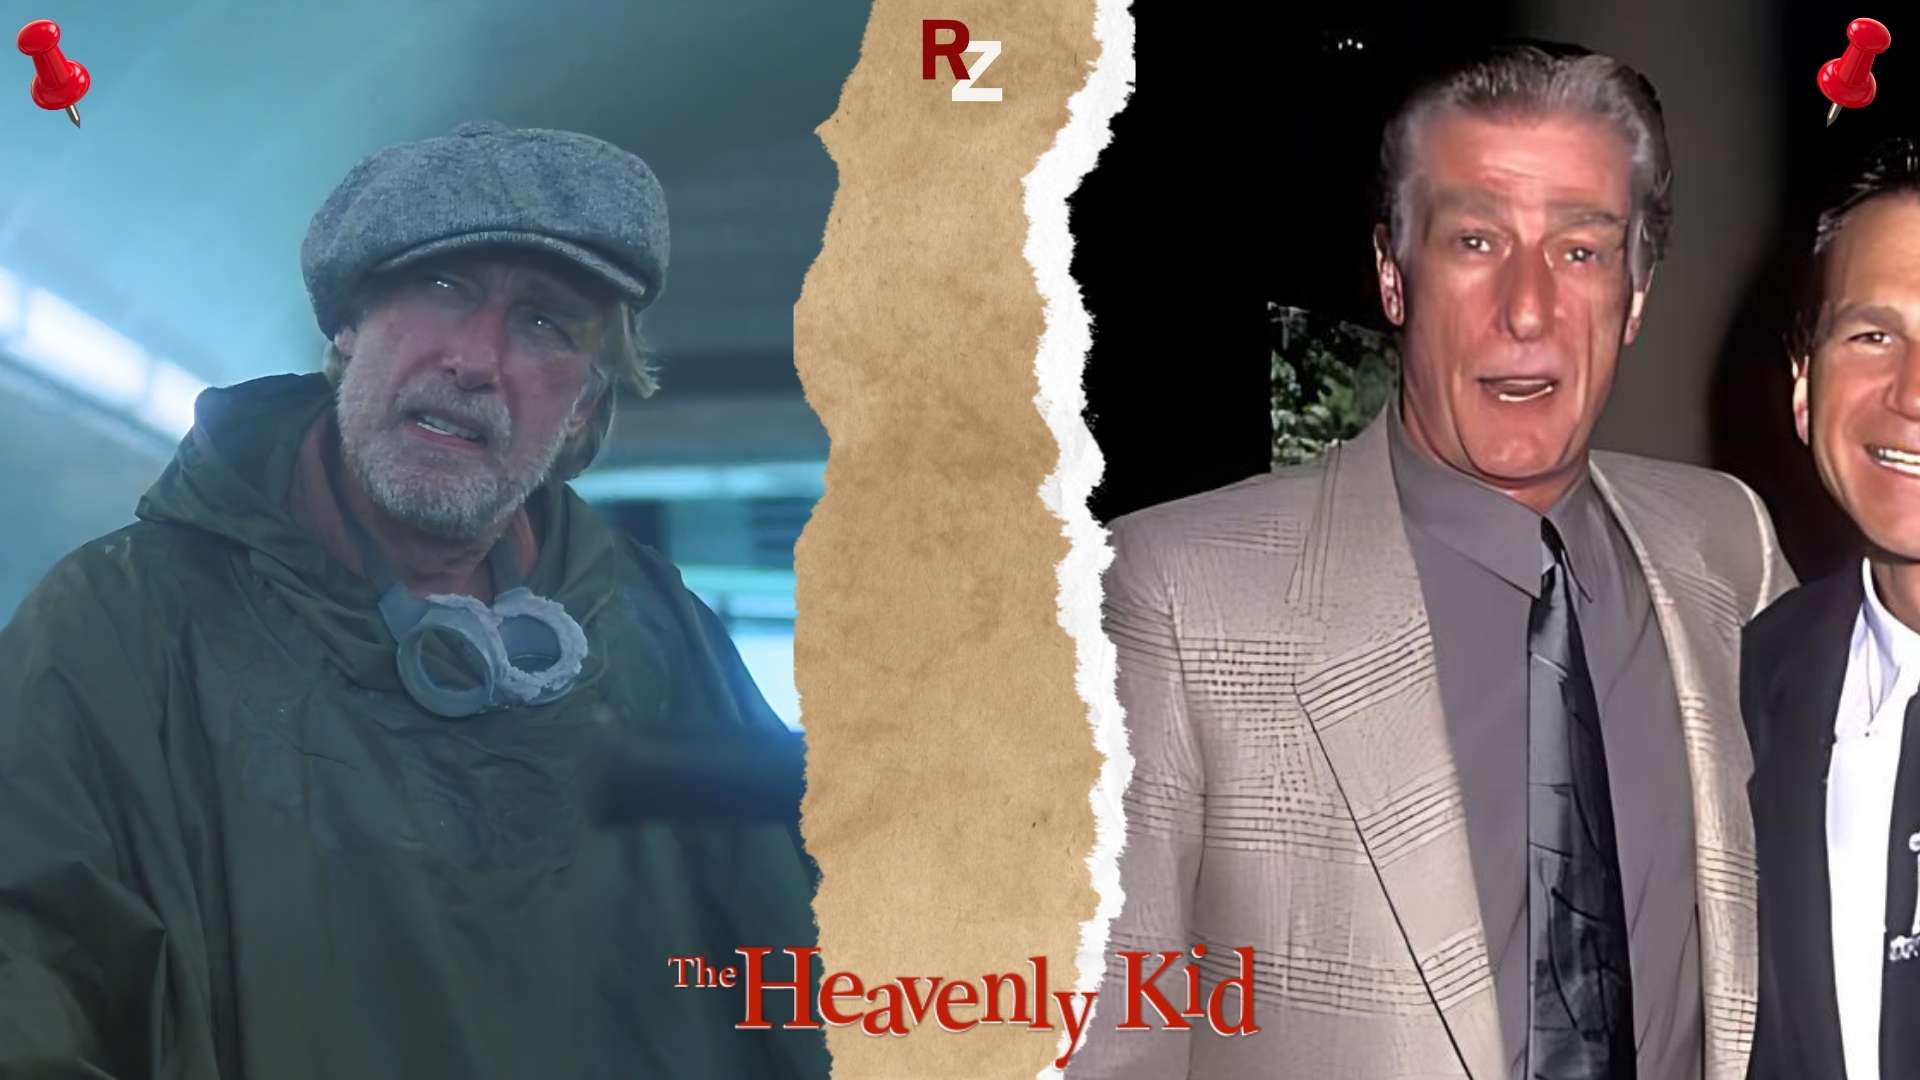 The Heavenly Kid (1985) Cast: Then and Now